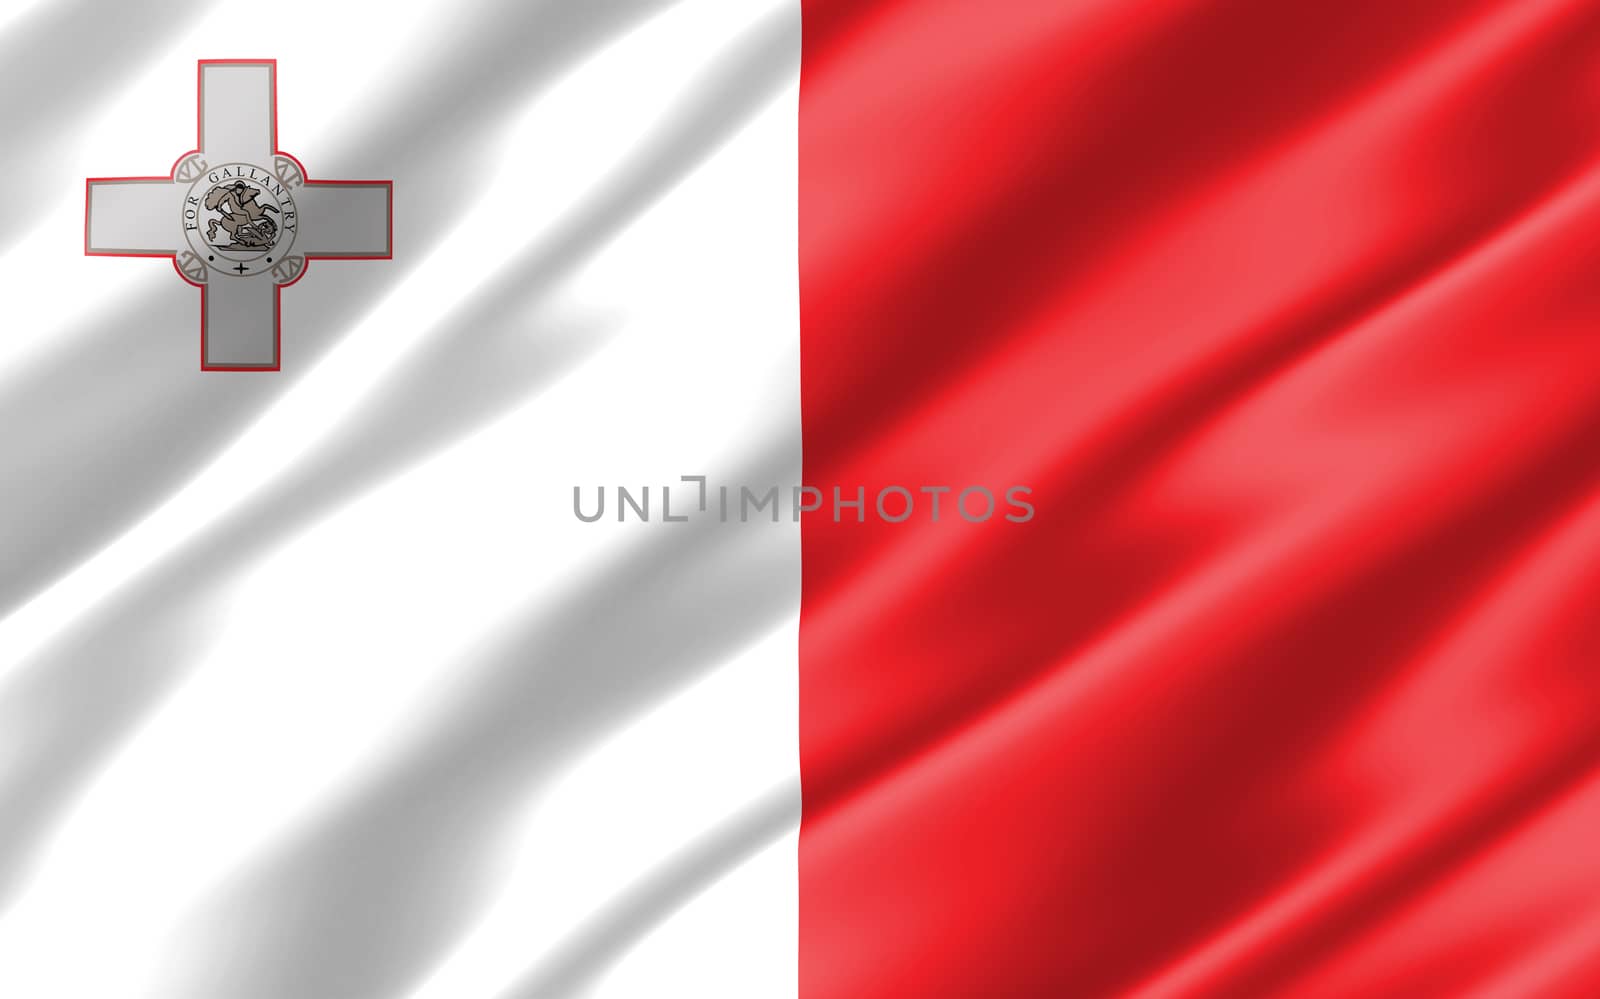 Silk wavy flag of Malta graphic. Wavy Maltese flag illustration. Rippled Malta country flag is a symbol of freedom, patriotism and independence.